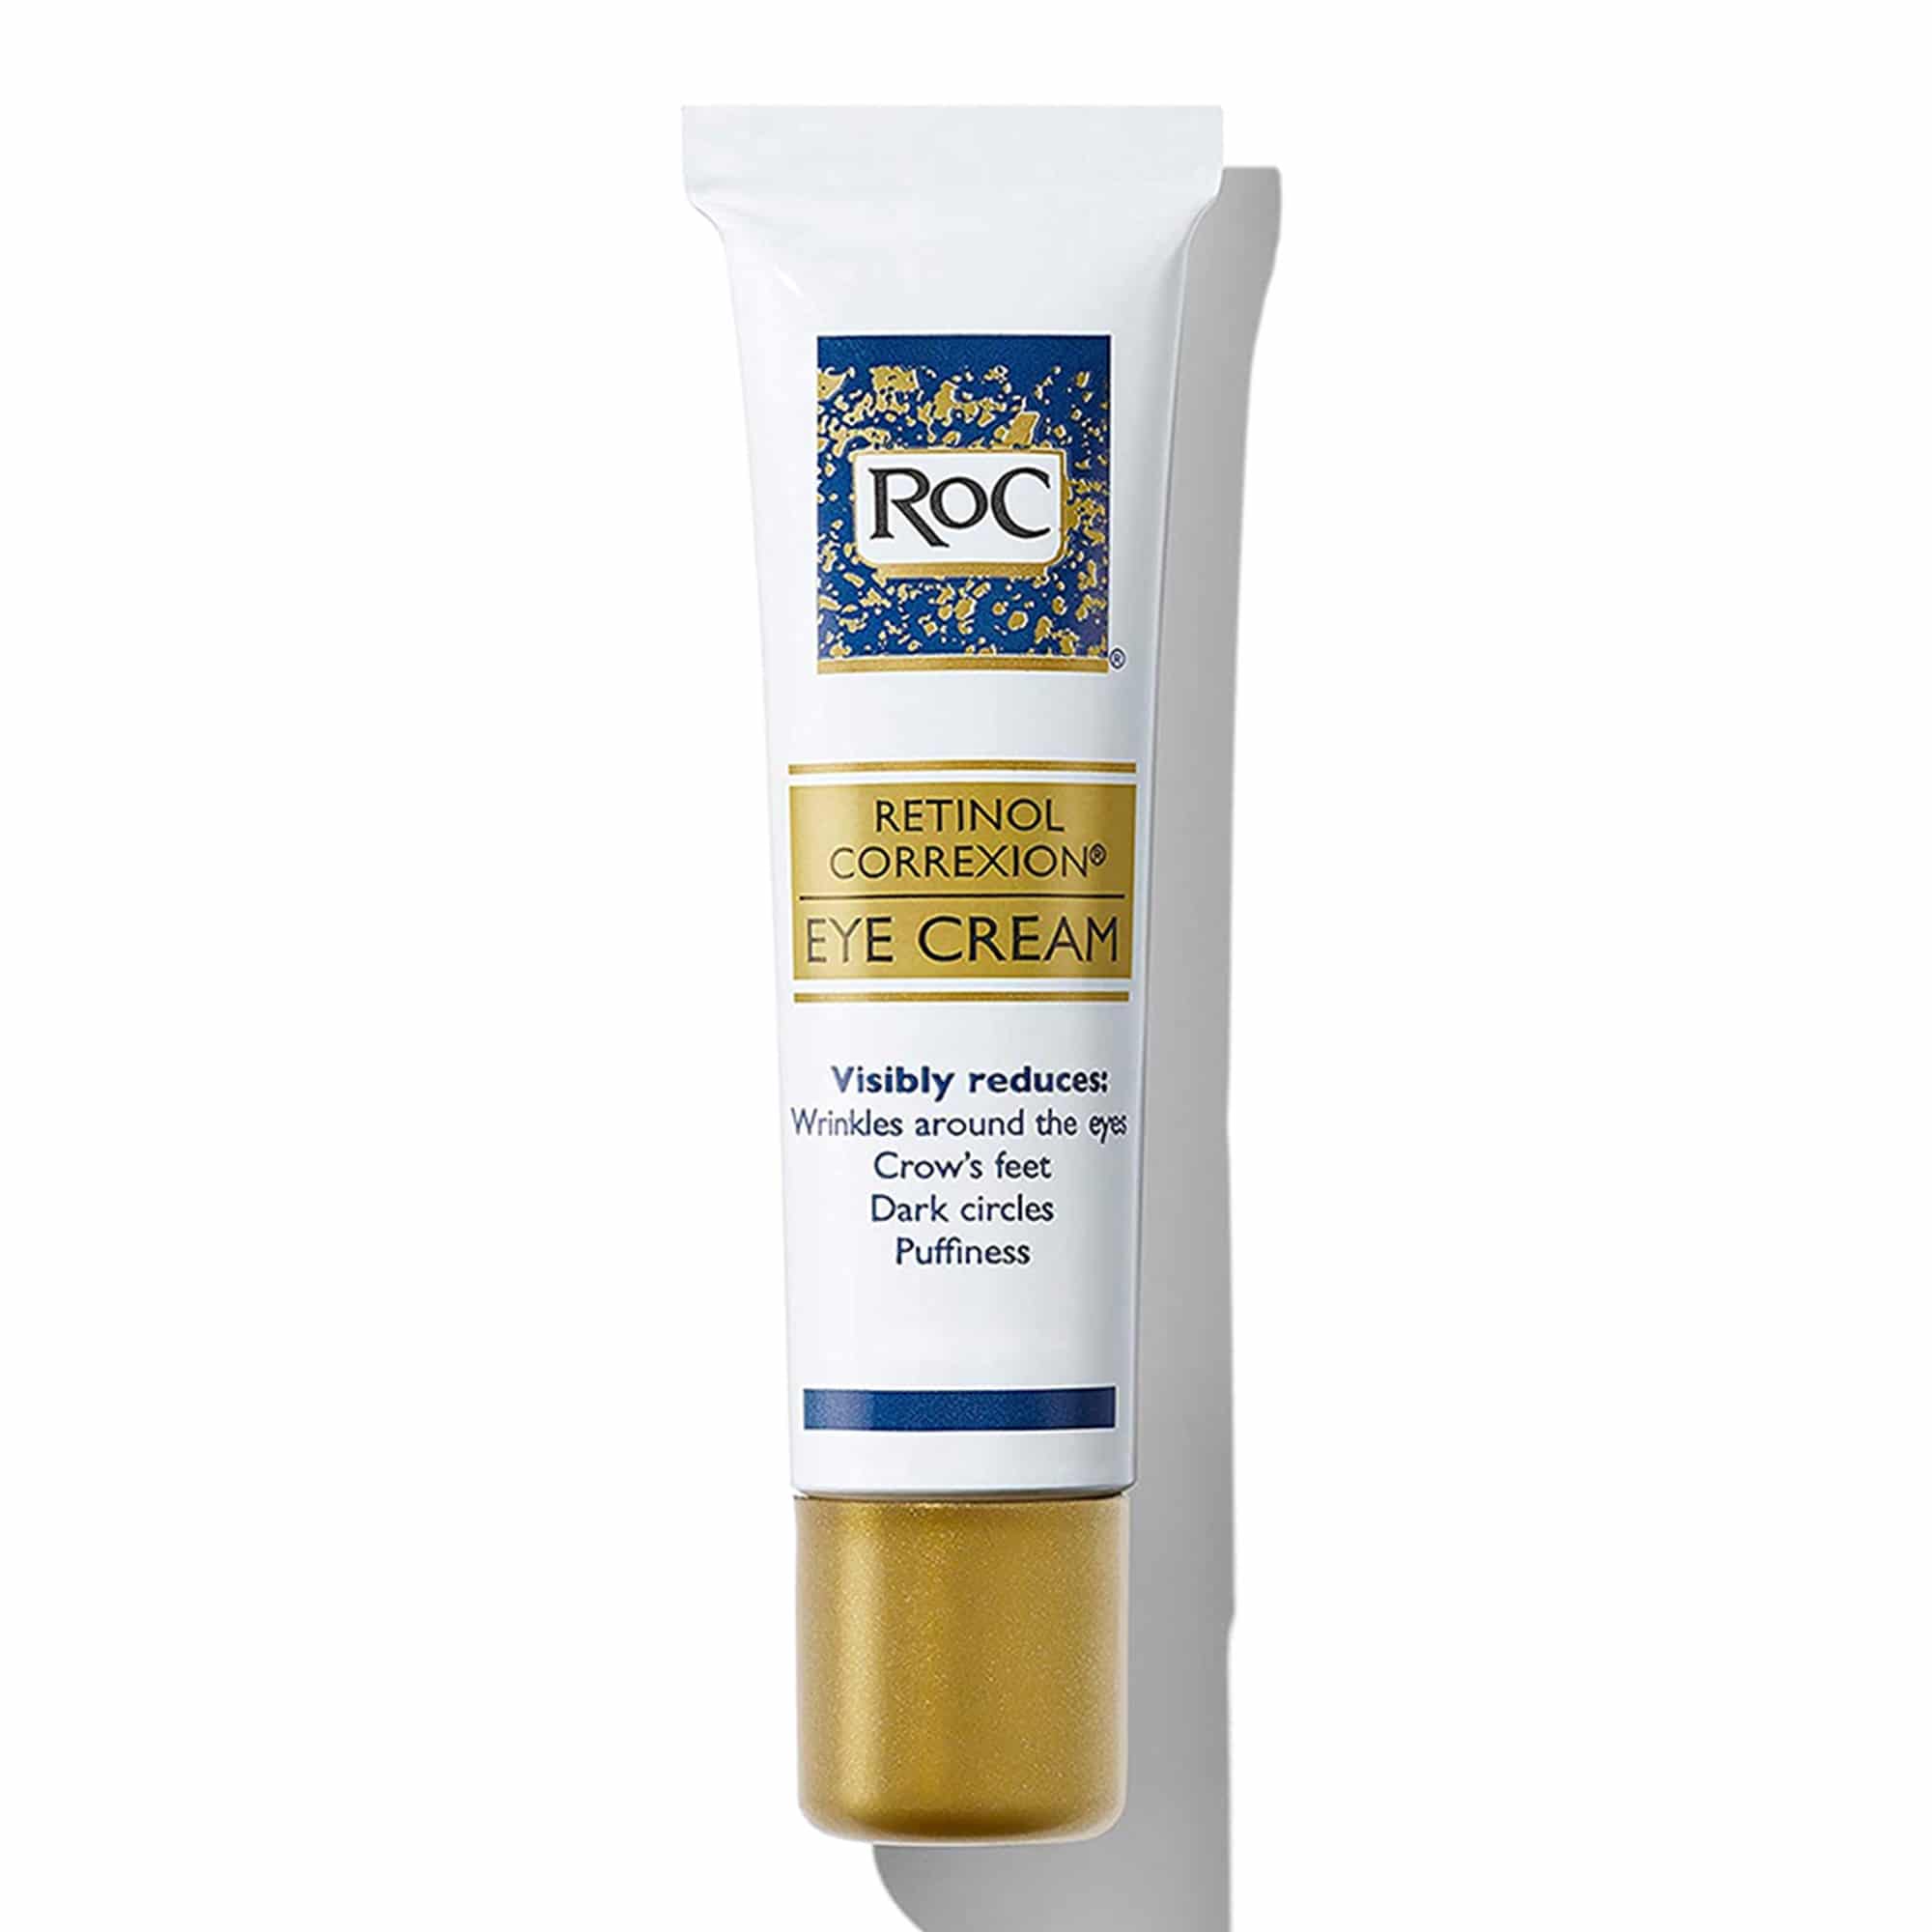 RoC Retinol Correxion Eye Cream to Prevent Wrinkles and Look Younger Naturally